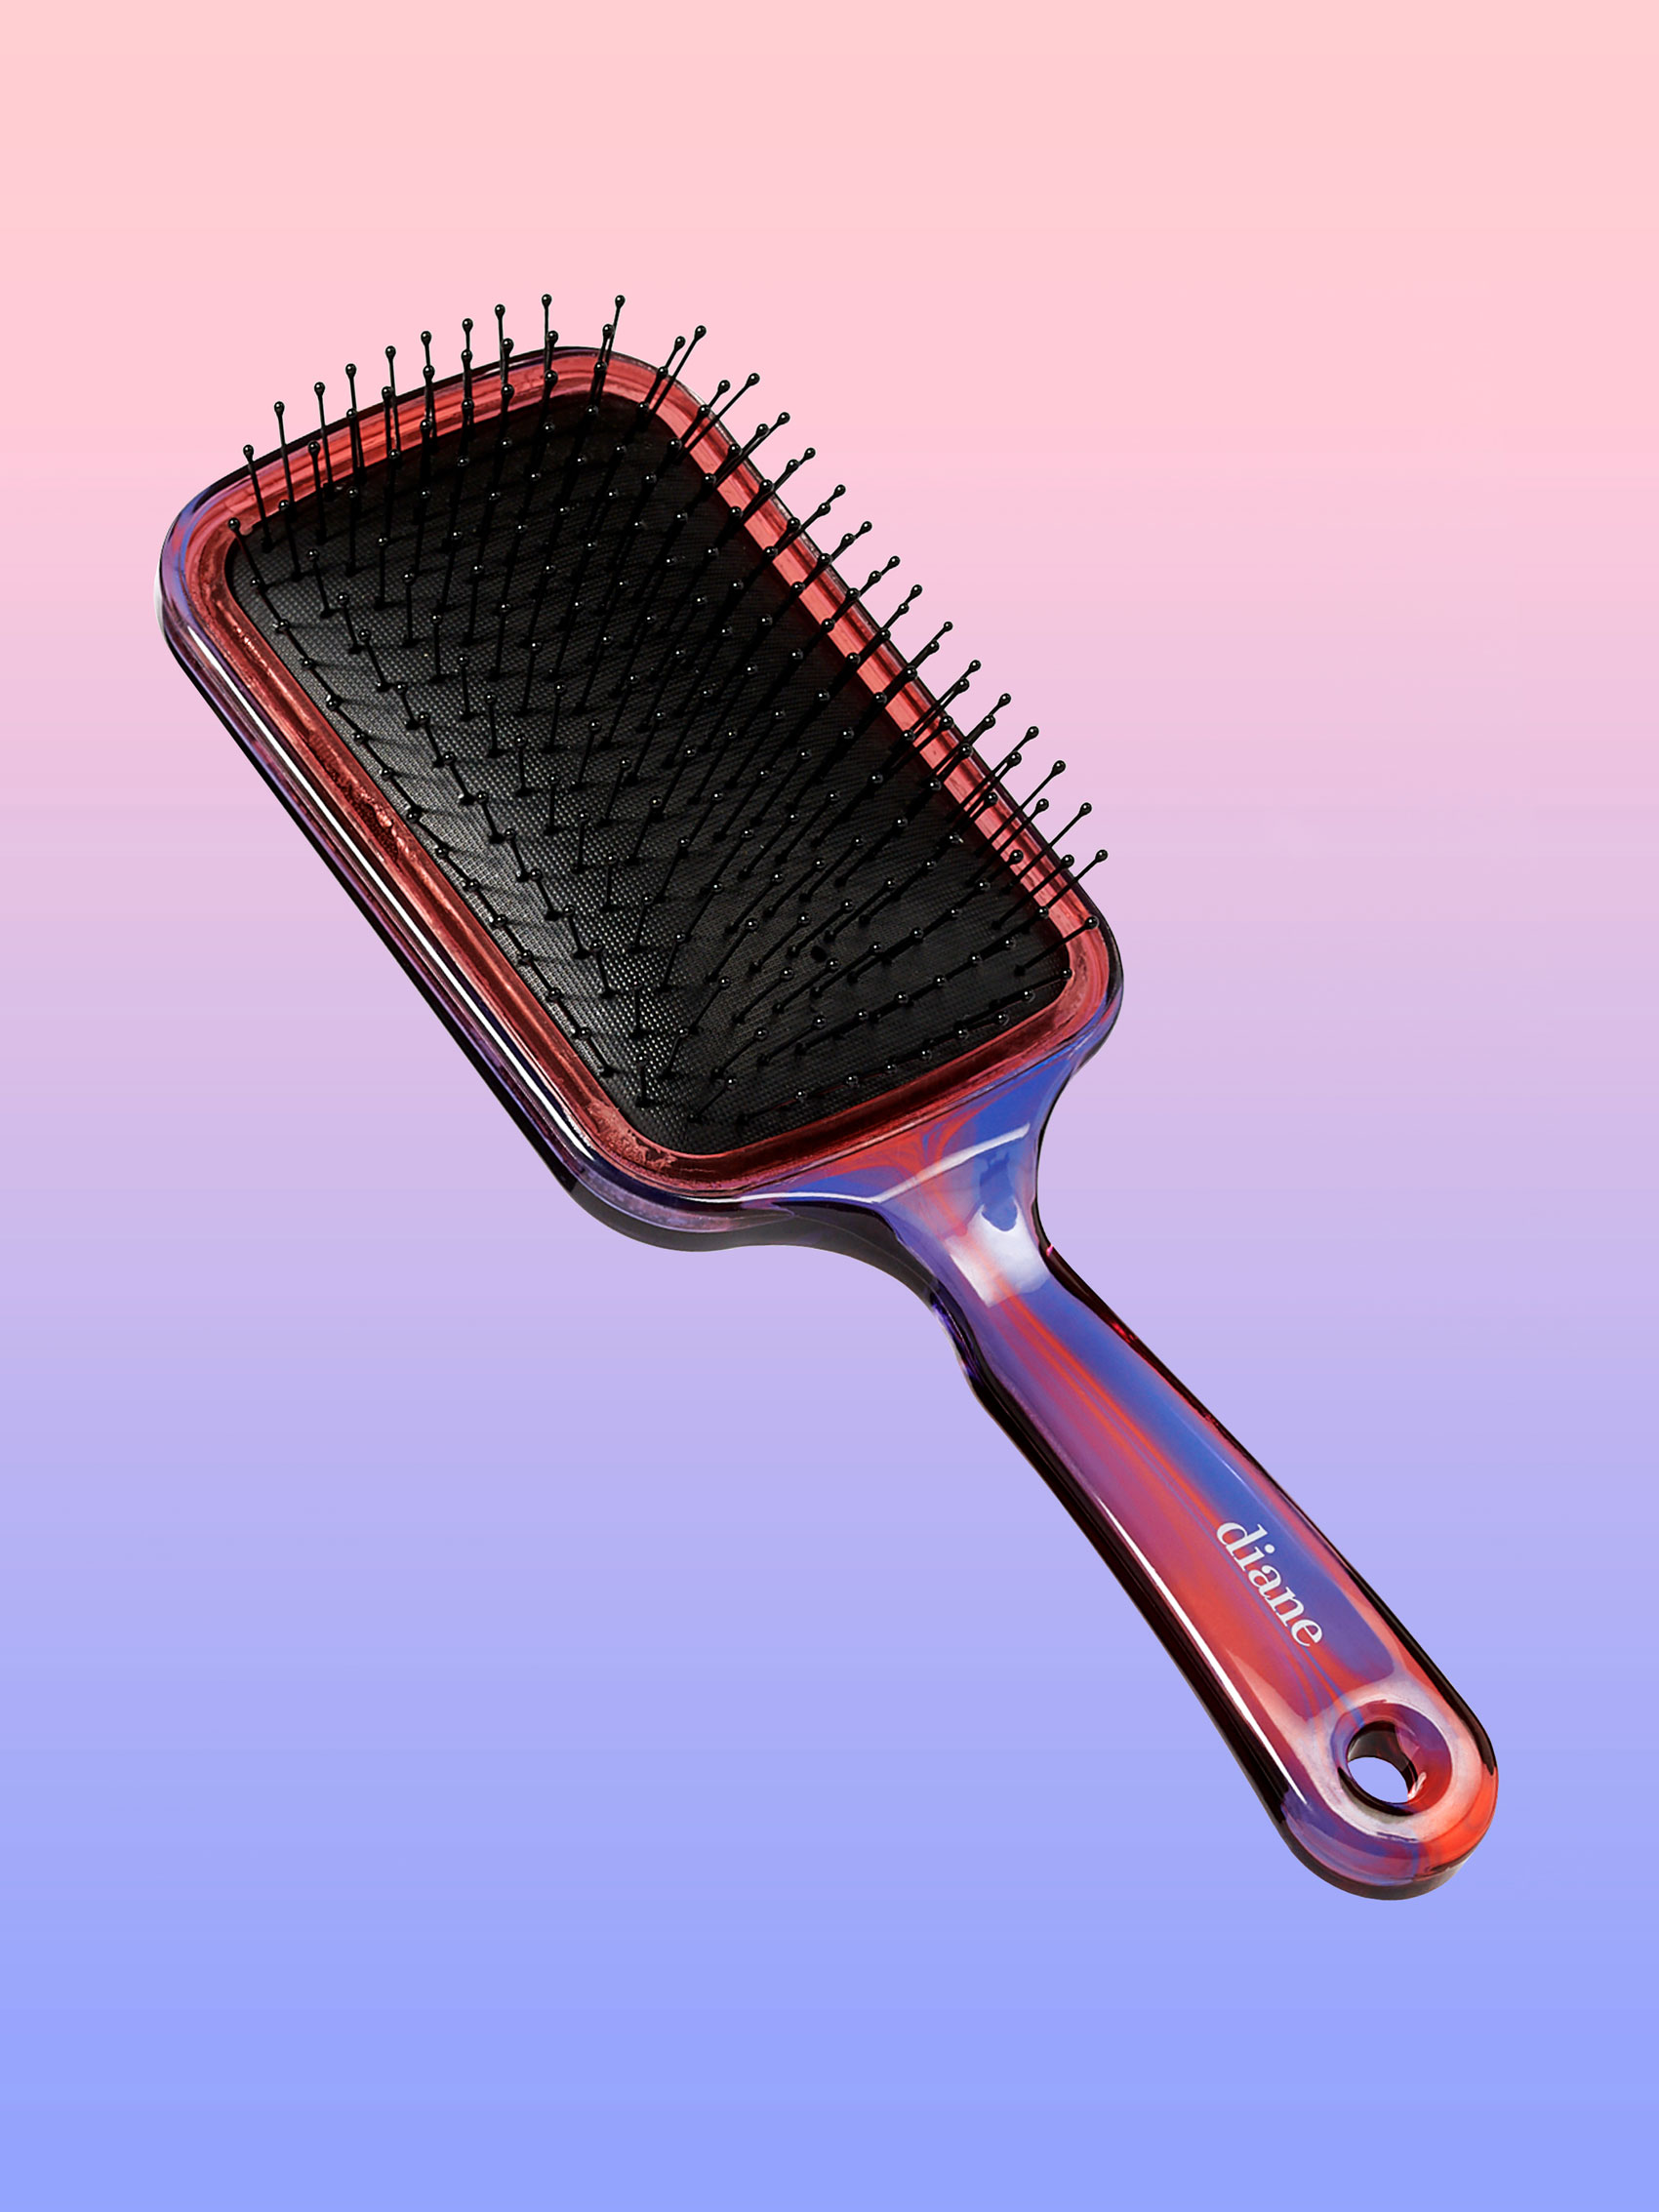 Square paddle brush suspended in air on pink and purple gradient